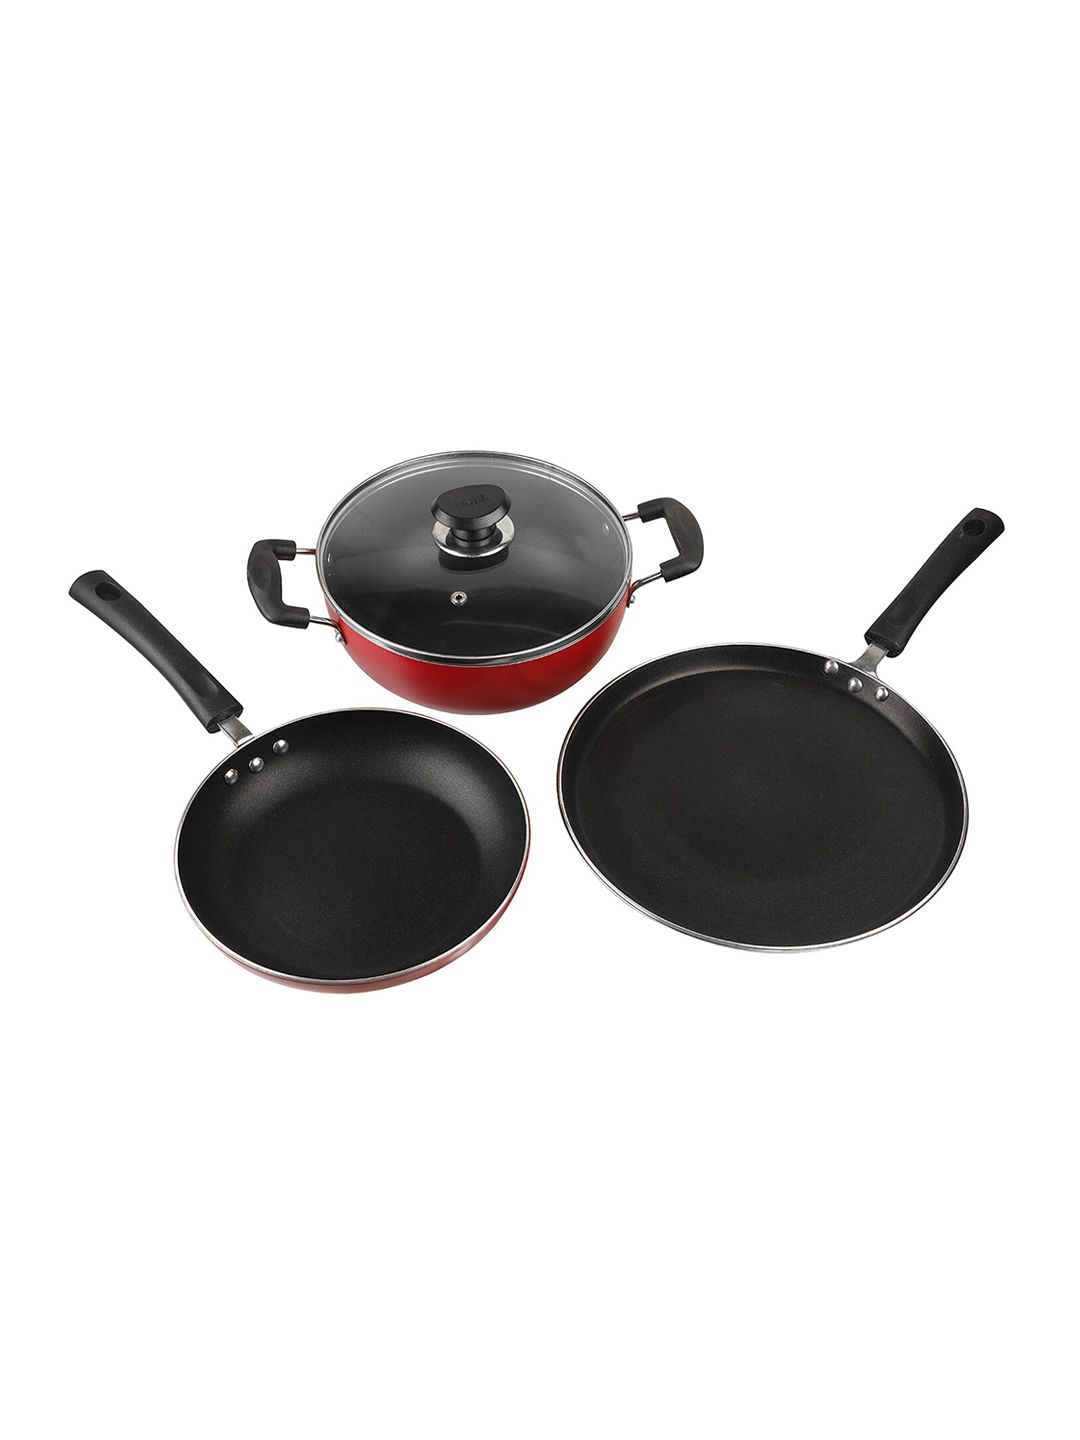 Vinod Set Of 3 Red & Black Solid Non-Stick Cookware Set Price in India